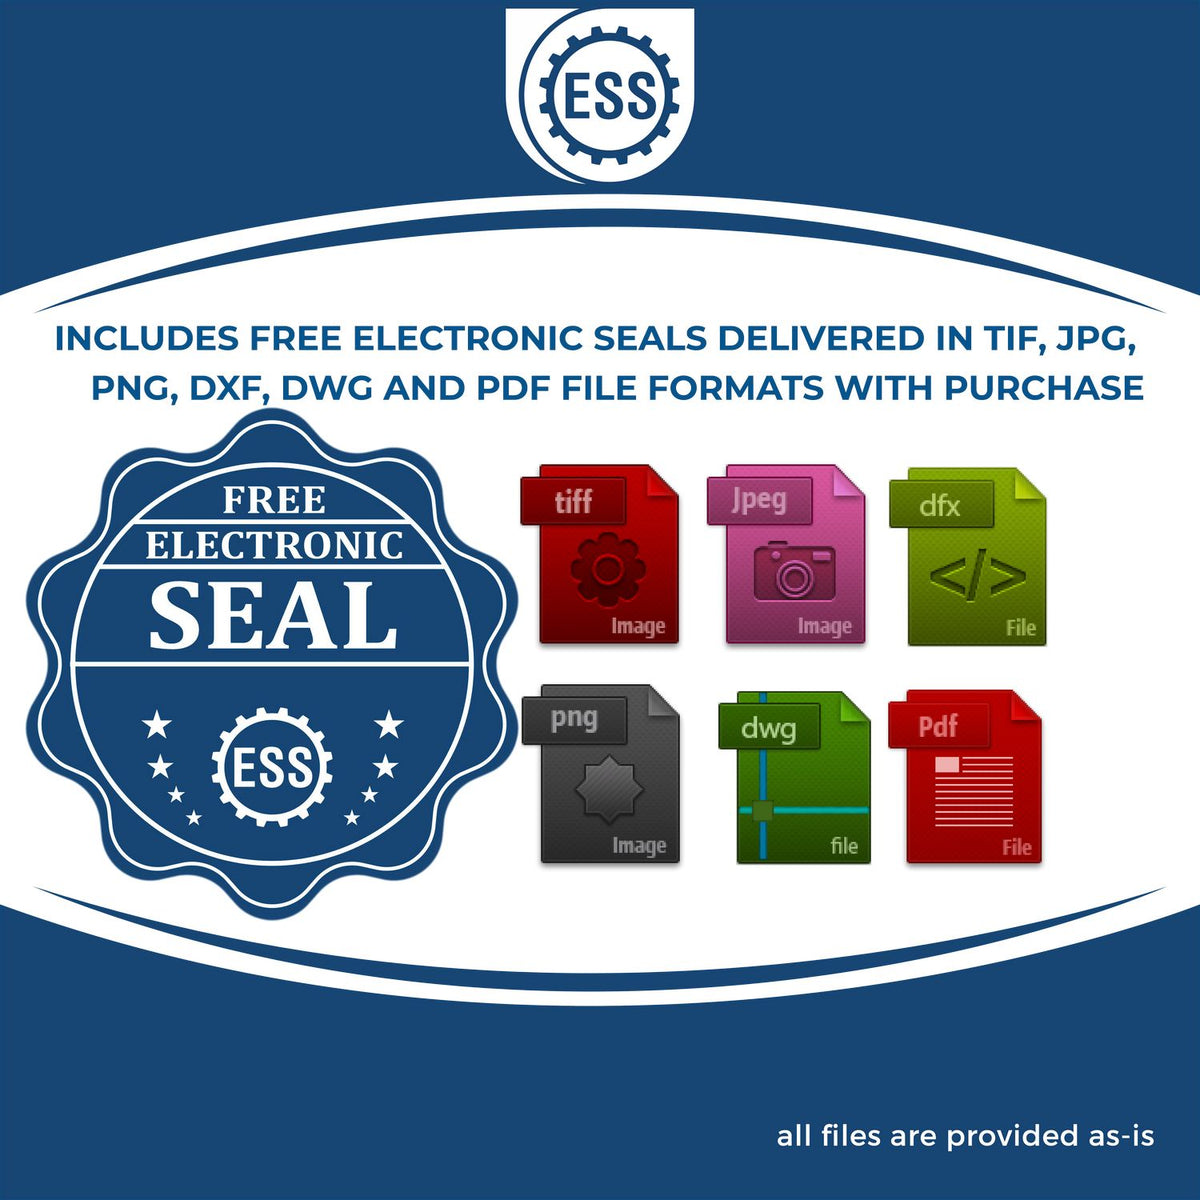 An infographic for the free electronic seal for the Heavy-Duty Georgia Rectangular Notary Stamp illustrating the different file type icons such as DXF, DWG, TIF, JPG and PNG.